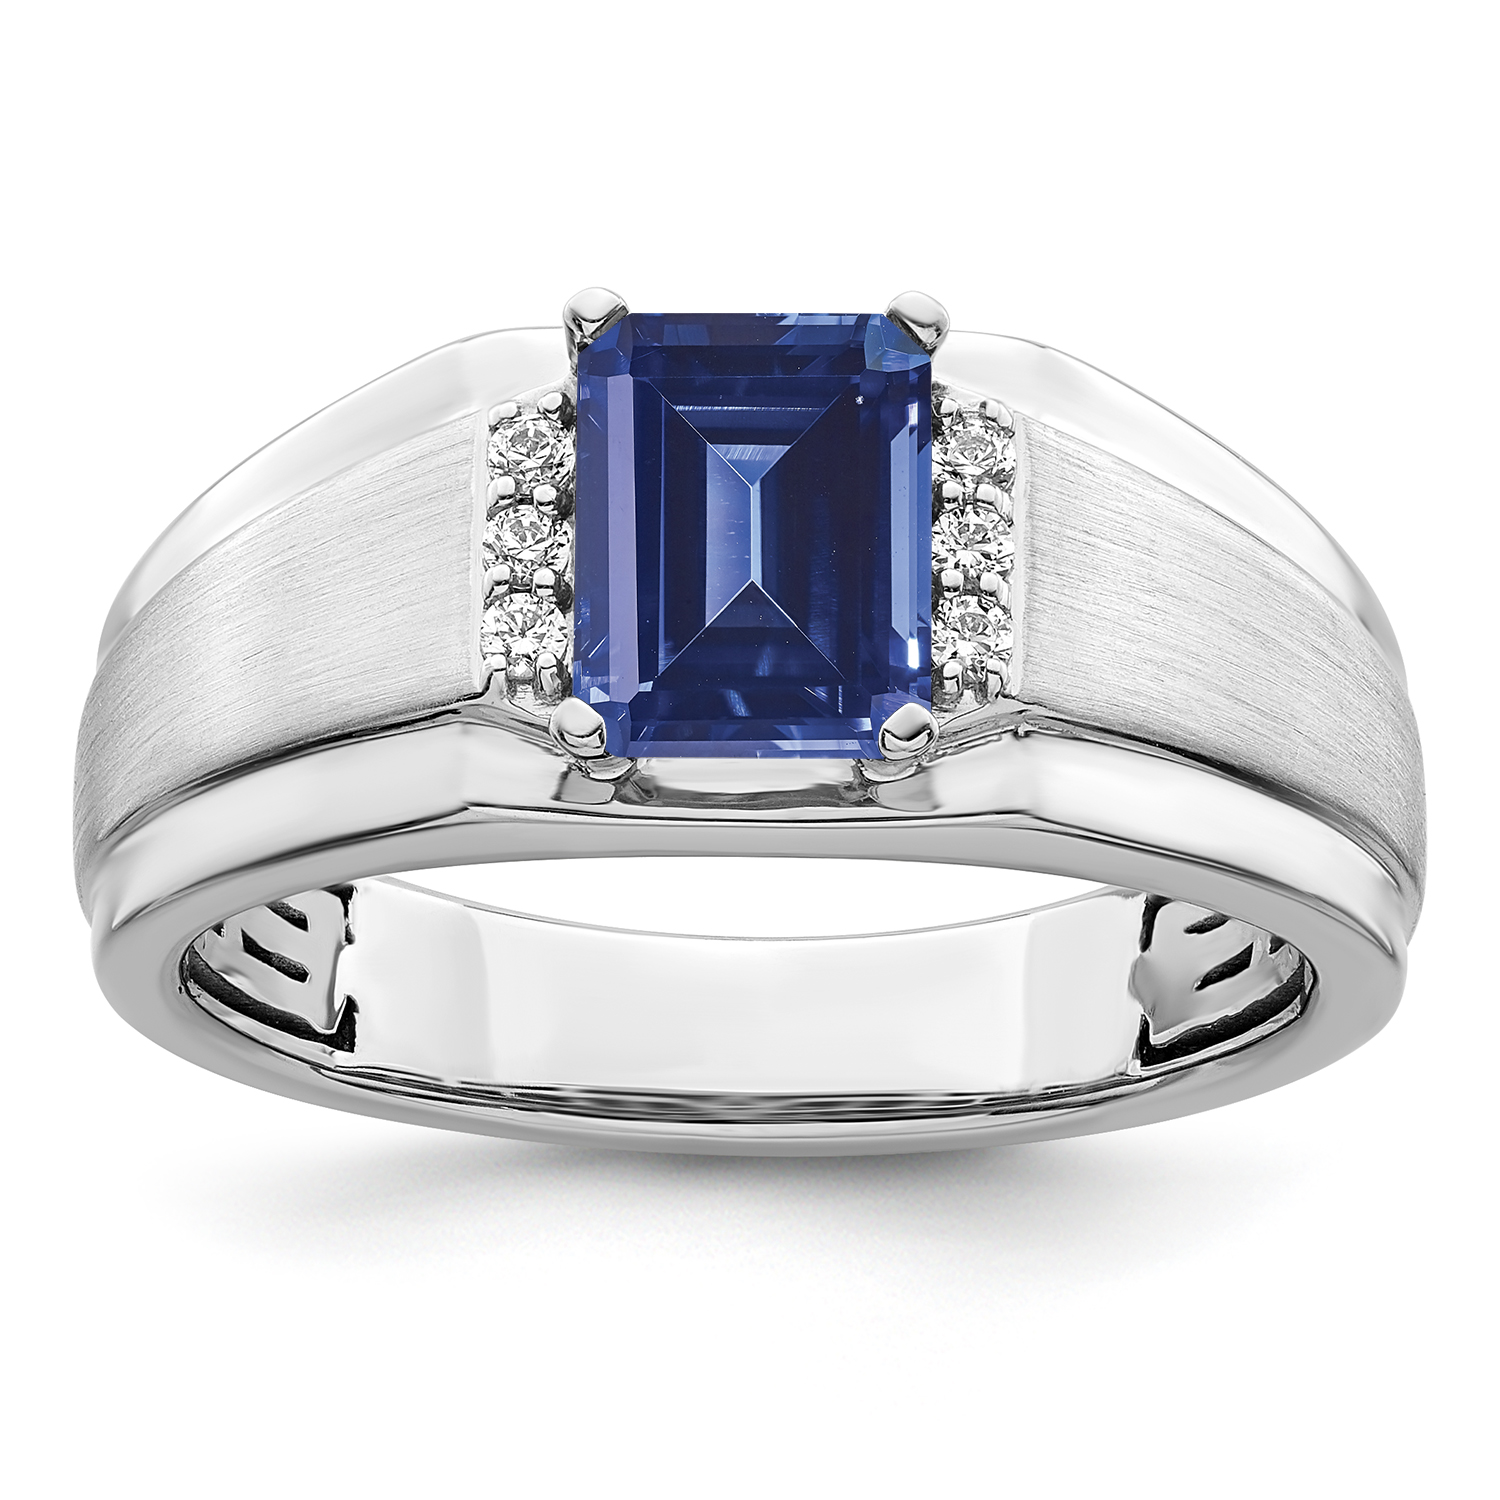 1.18 Carat White and Blue Diamond Mens Ring in White Gold - Monarch Jewels  Alaska